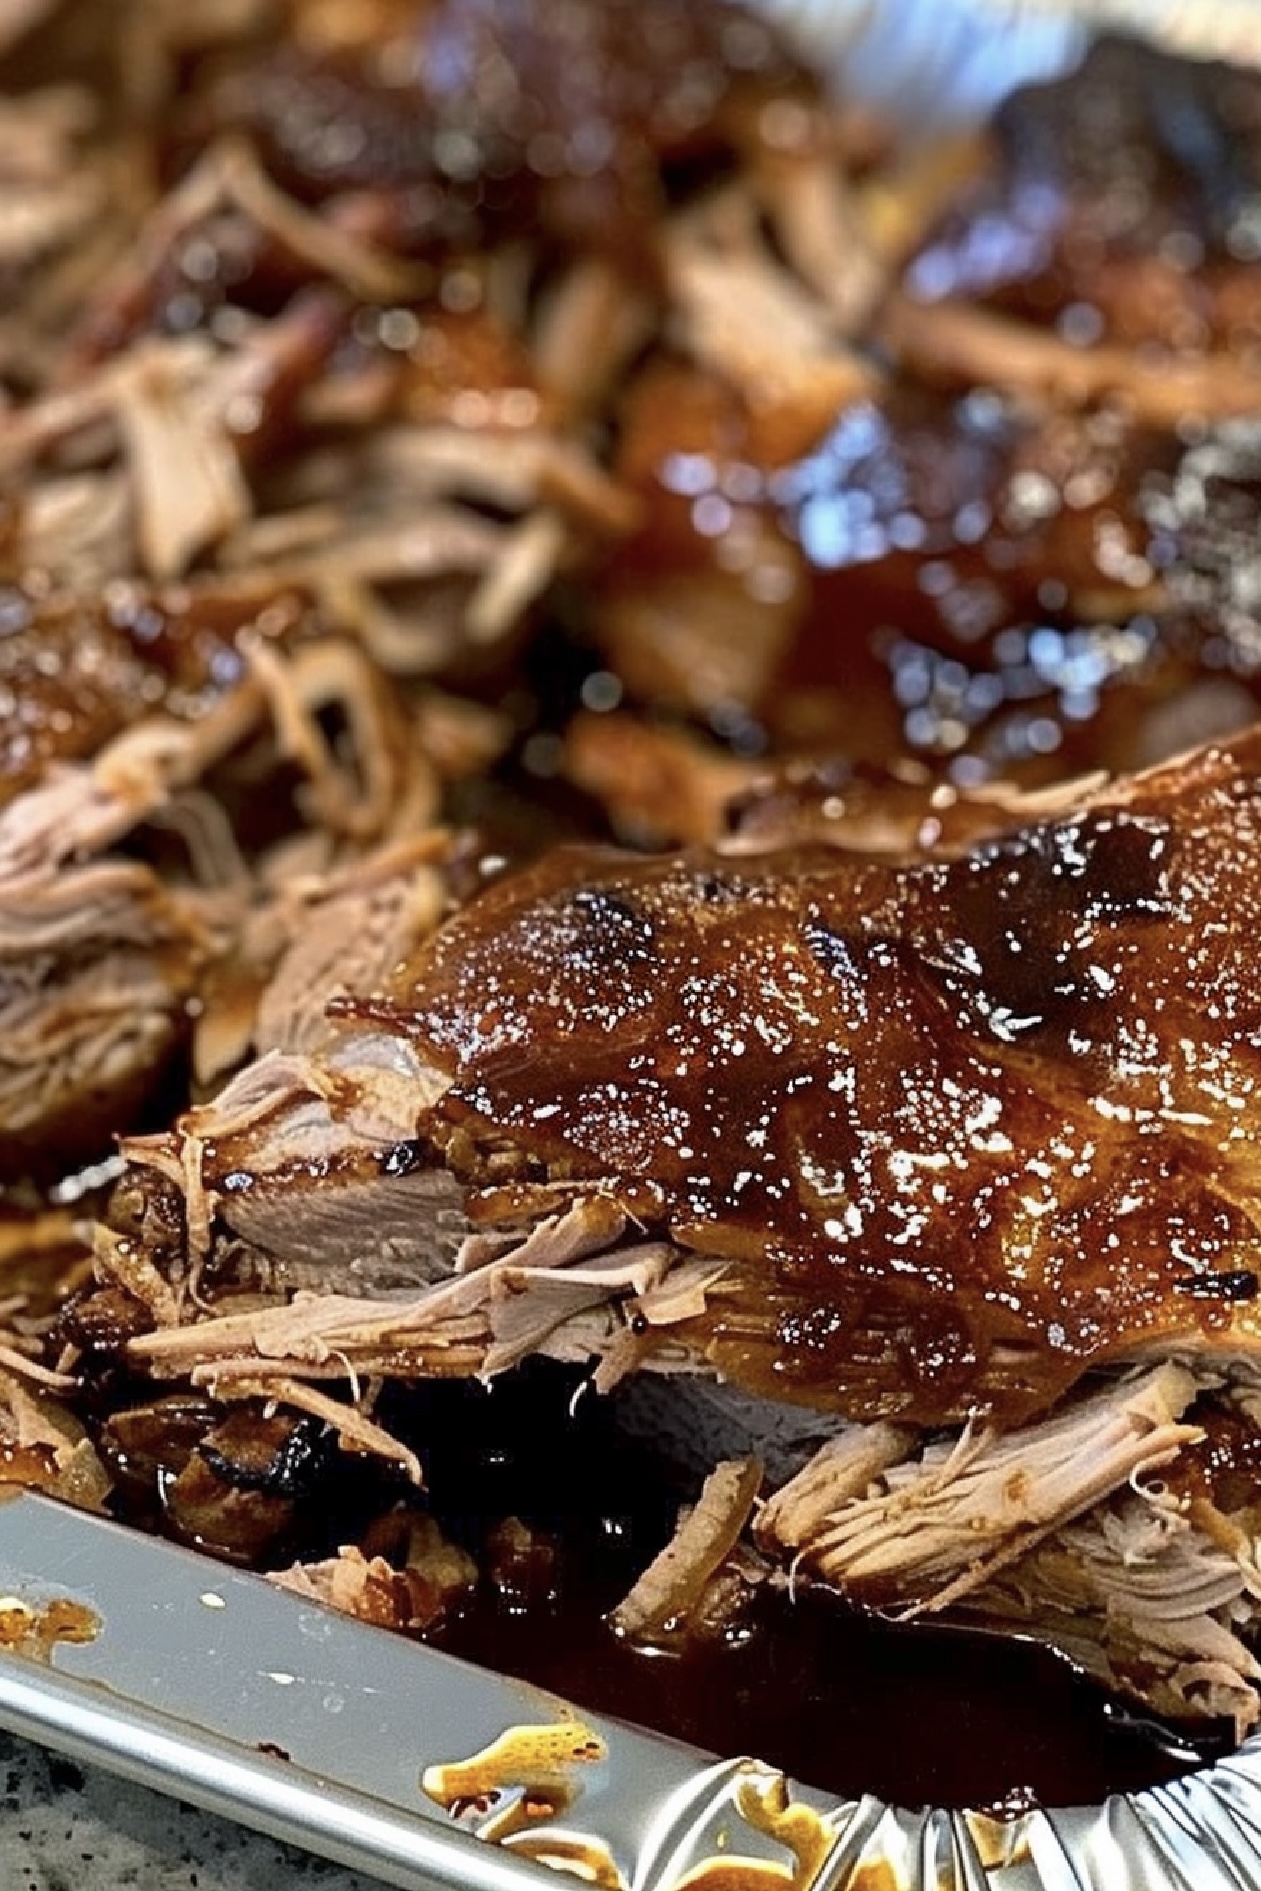 Discover the authentic taste of Hawaii with this easy Kalua Pig recipe, made in your slow cooker with just three ingredients!